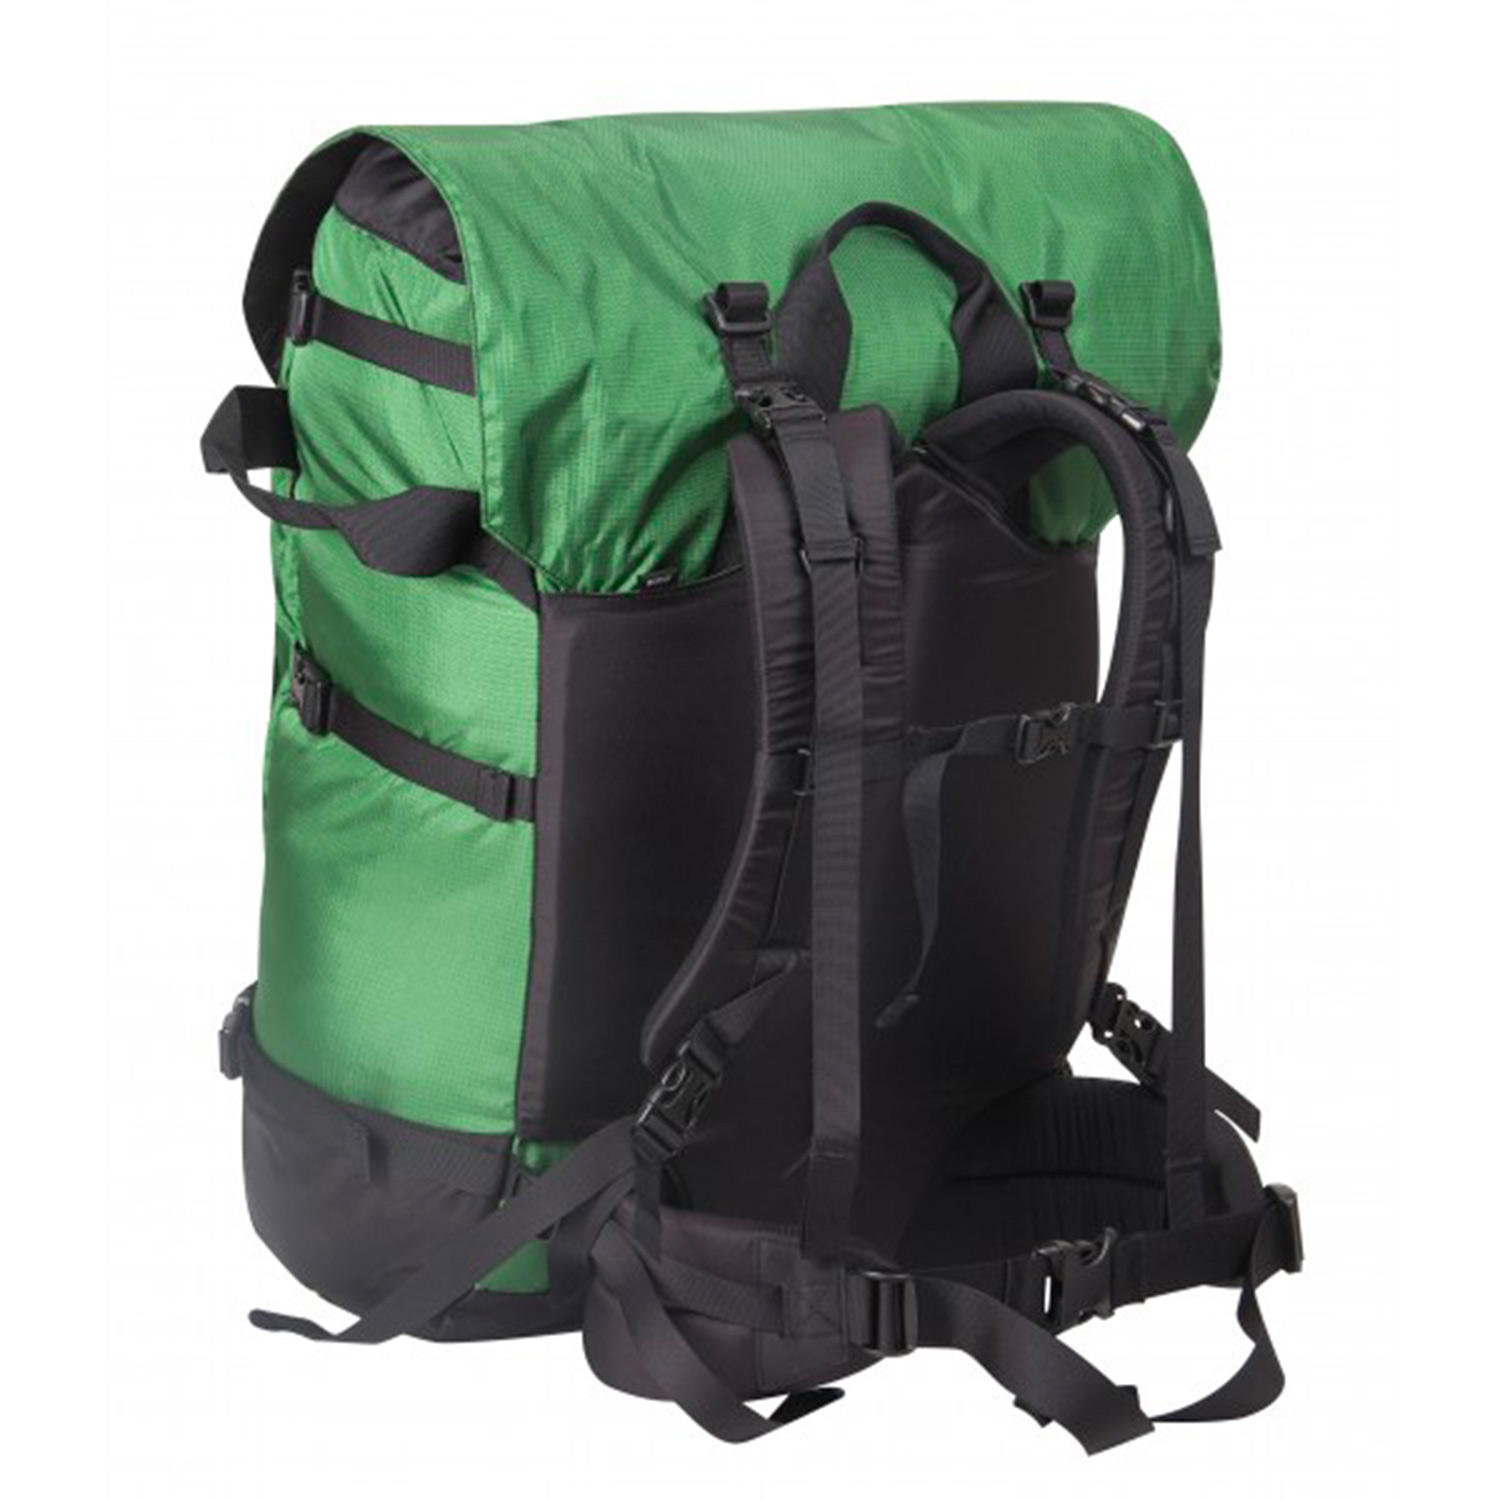 Quetico Portage Pack 5000 From Granite Gear, Portage Packs 